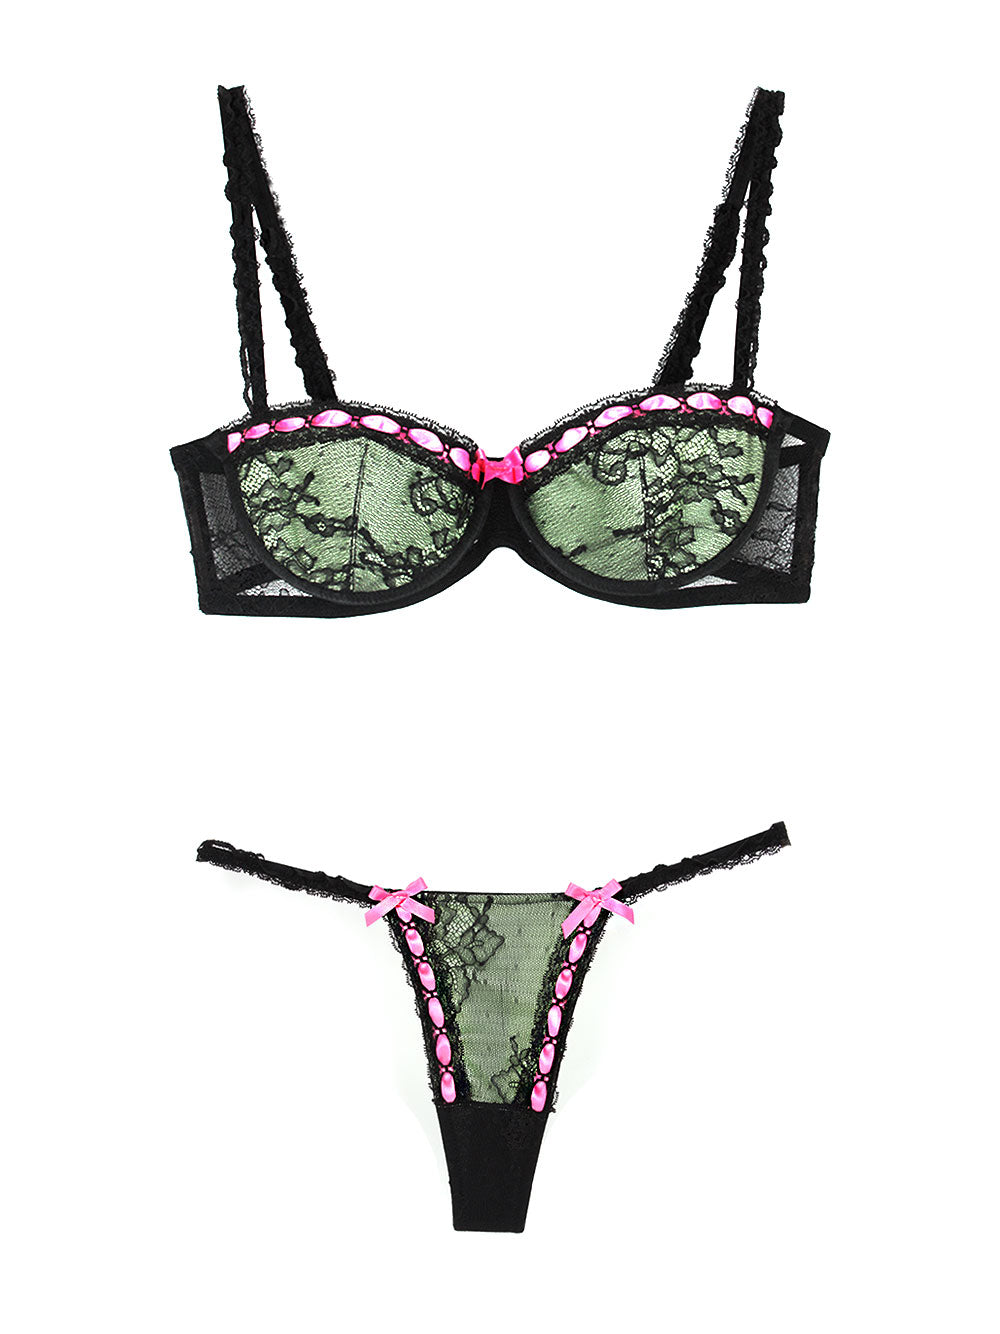 GREEN AND BLACK LACE SET